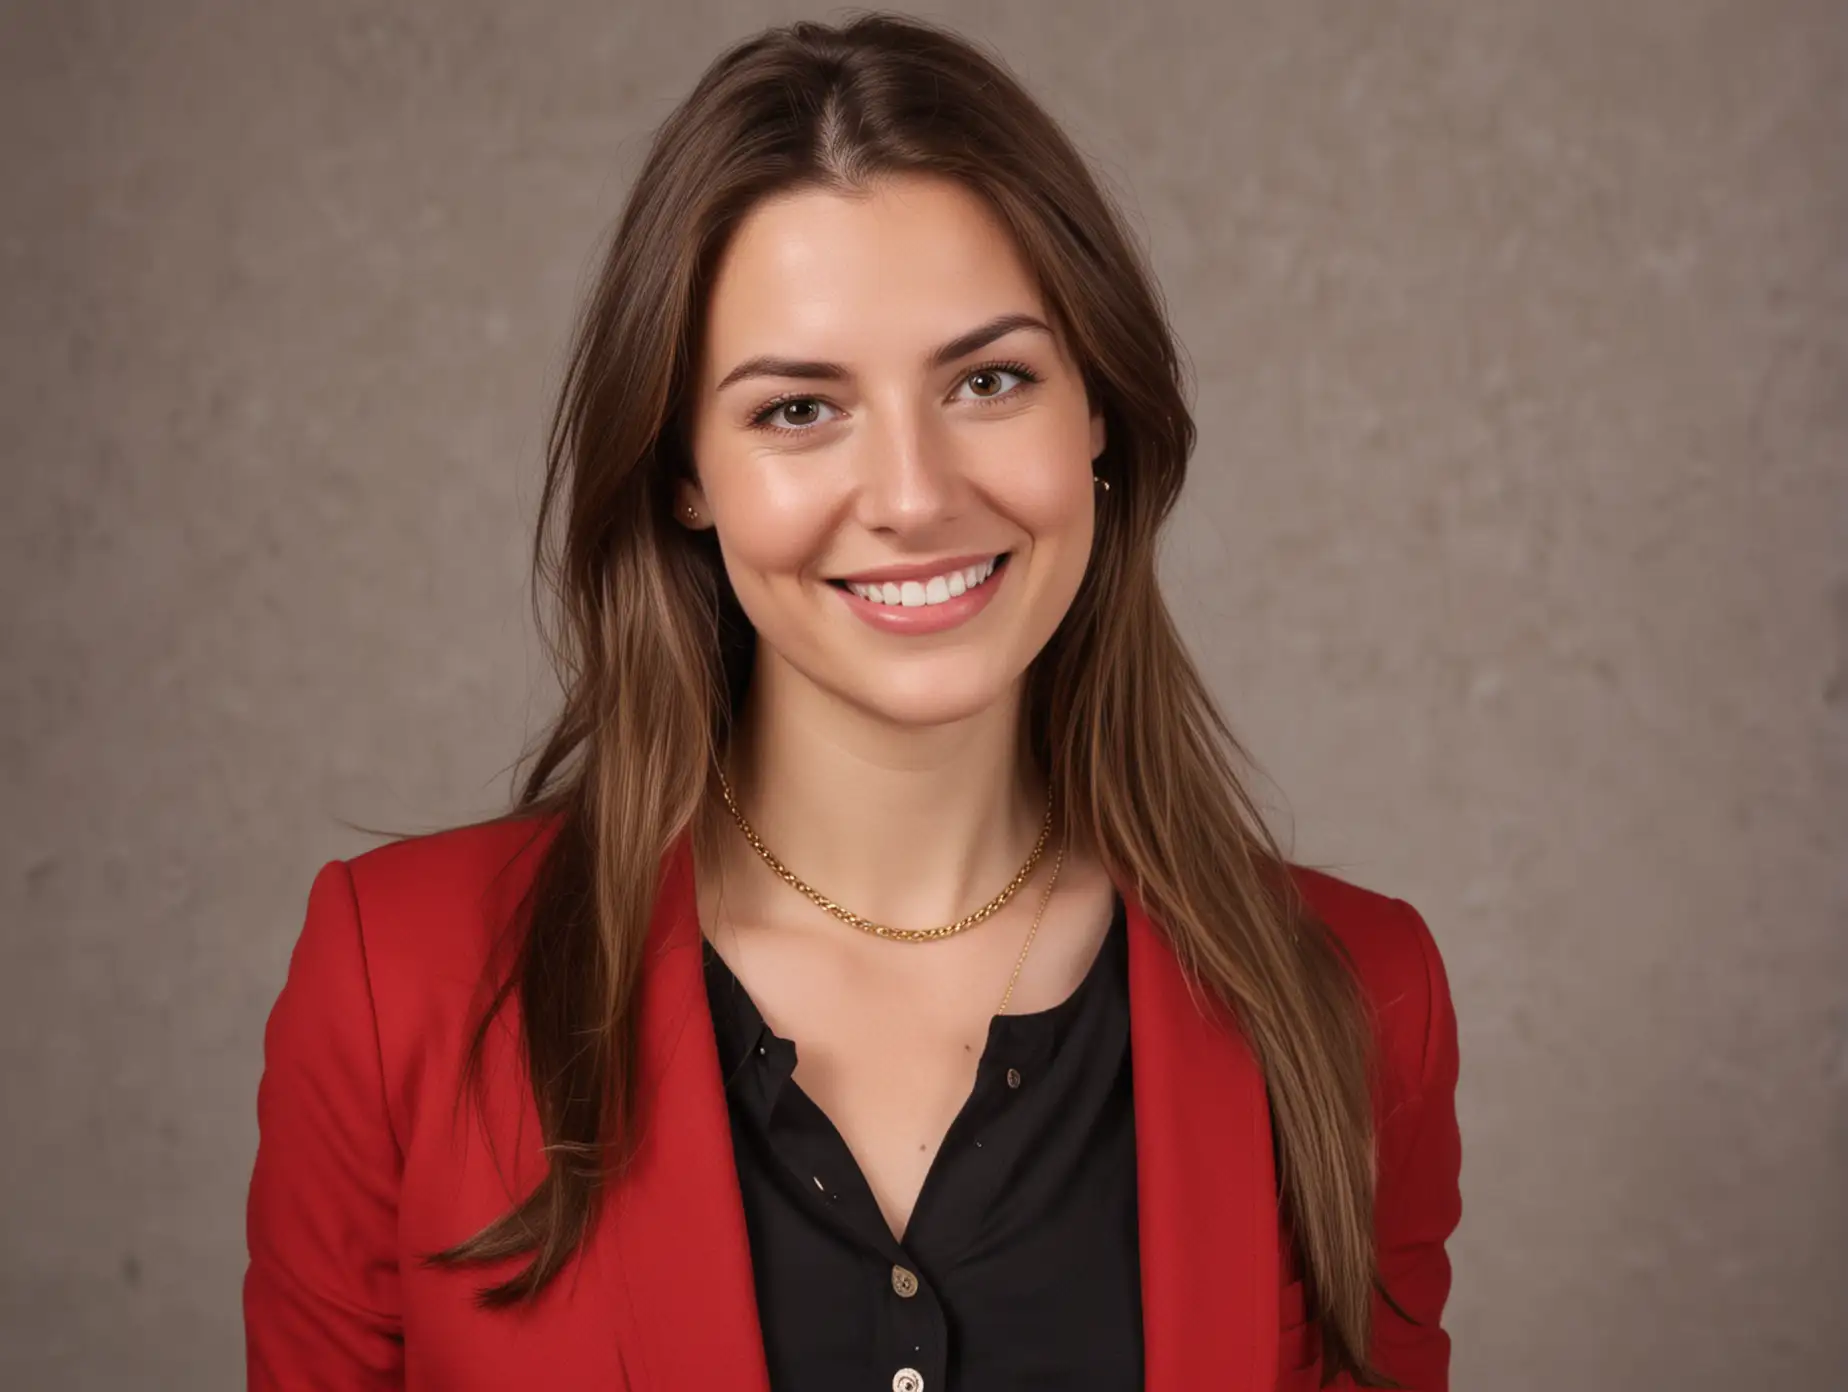 Confident Young Woman in Stylish Red Blazer Smiling at Camera